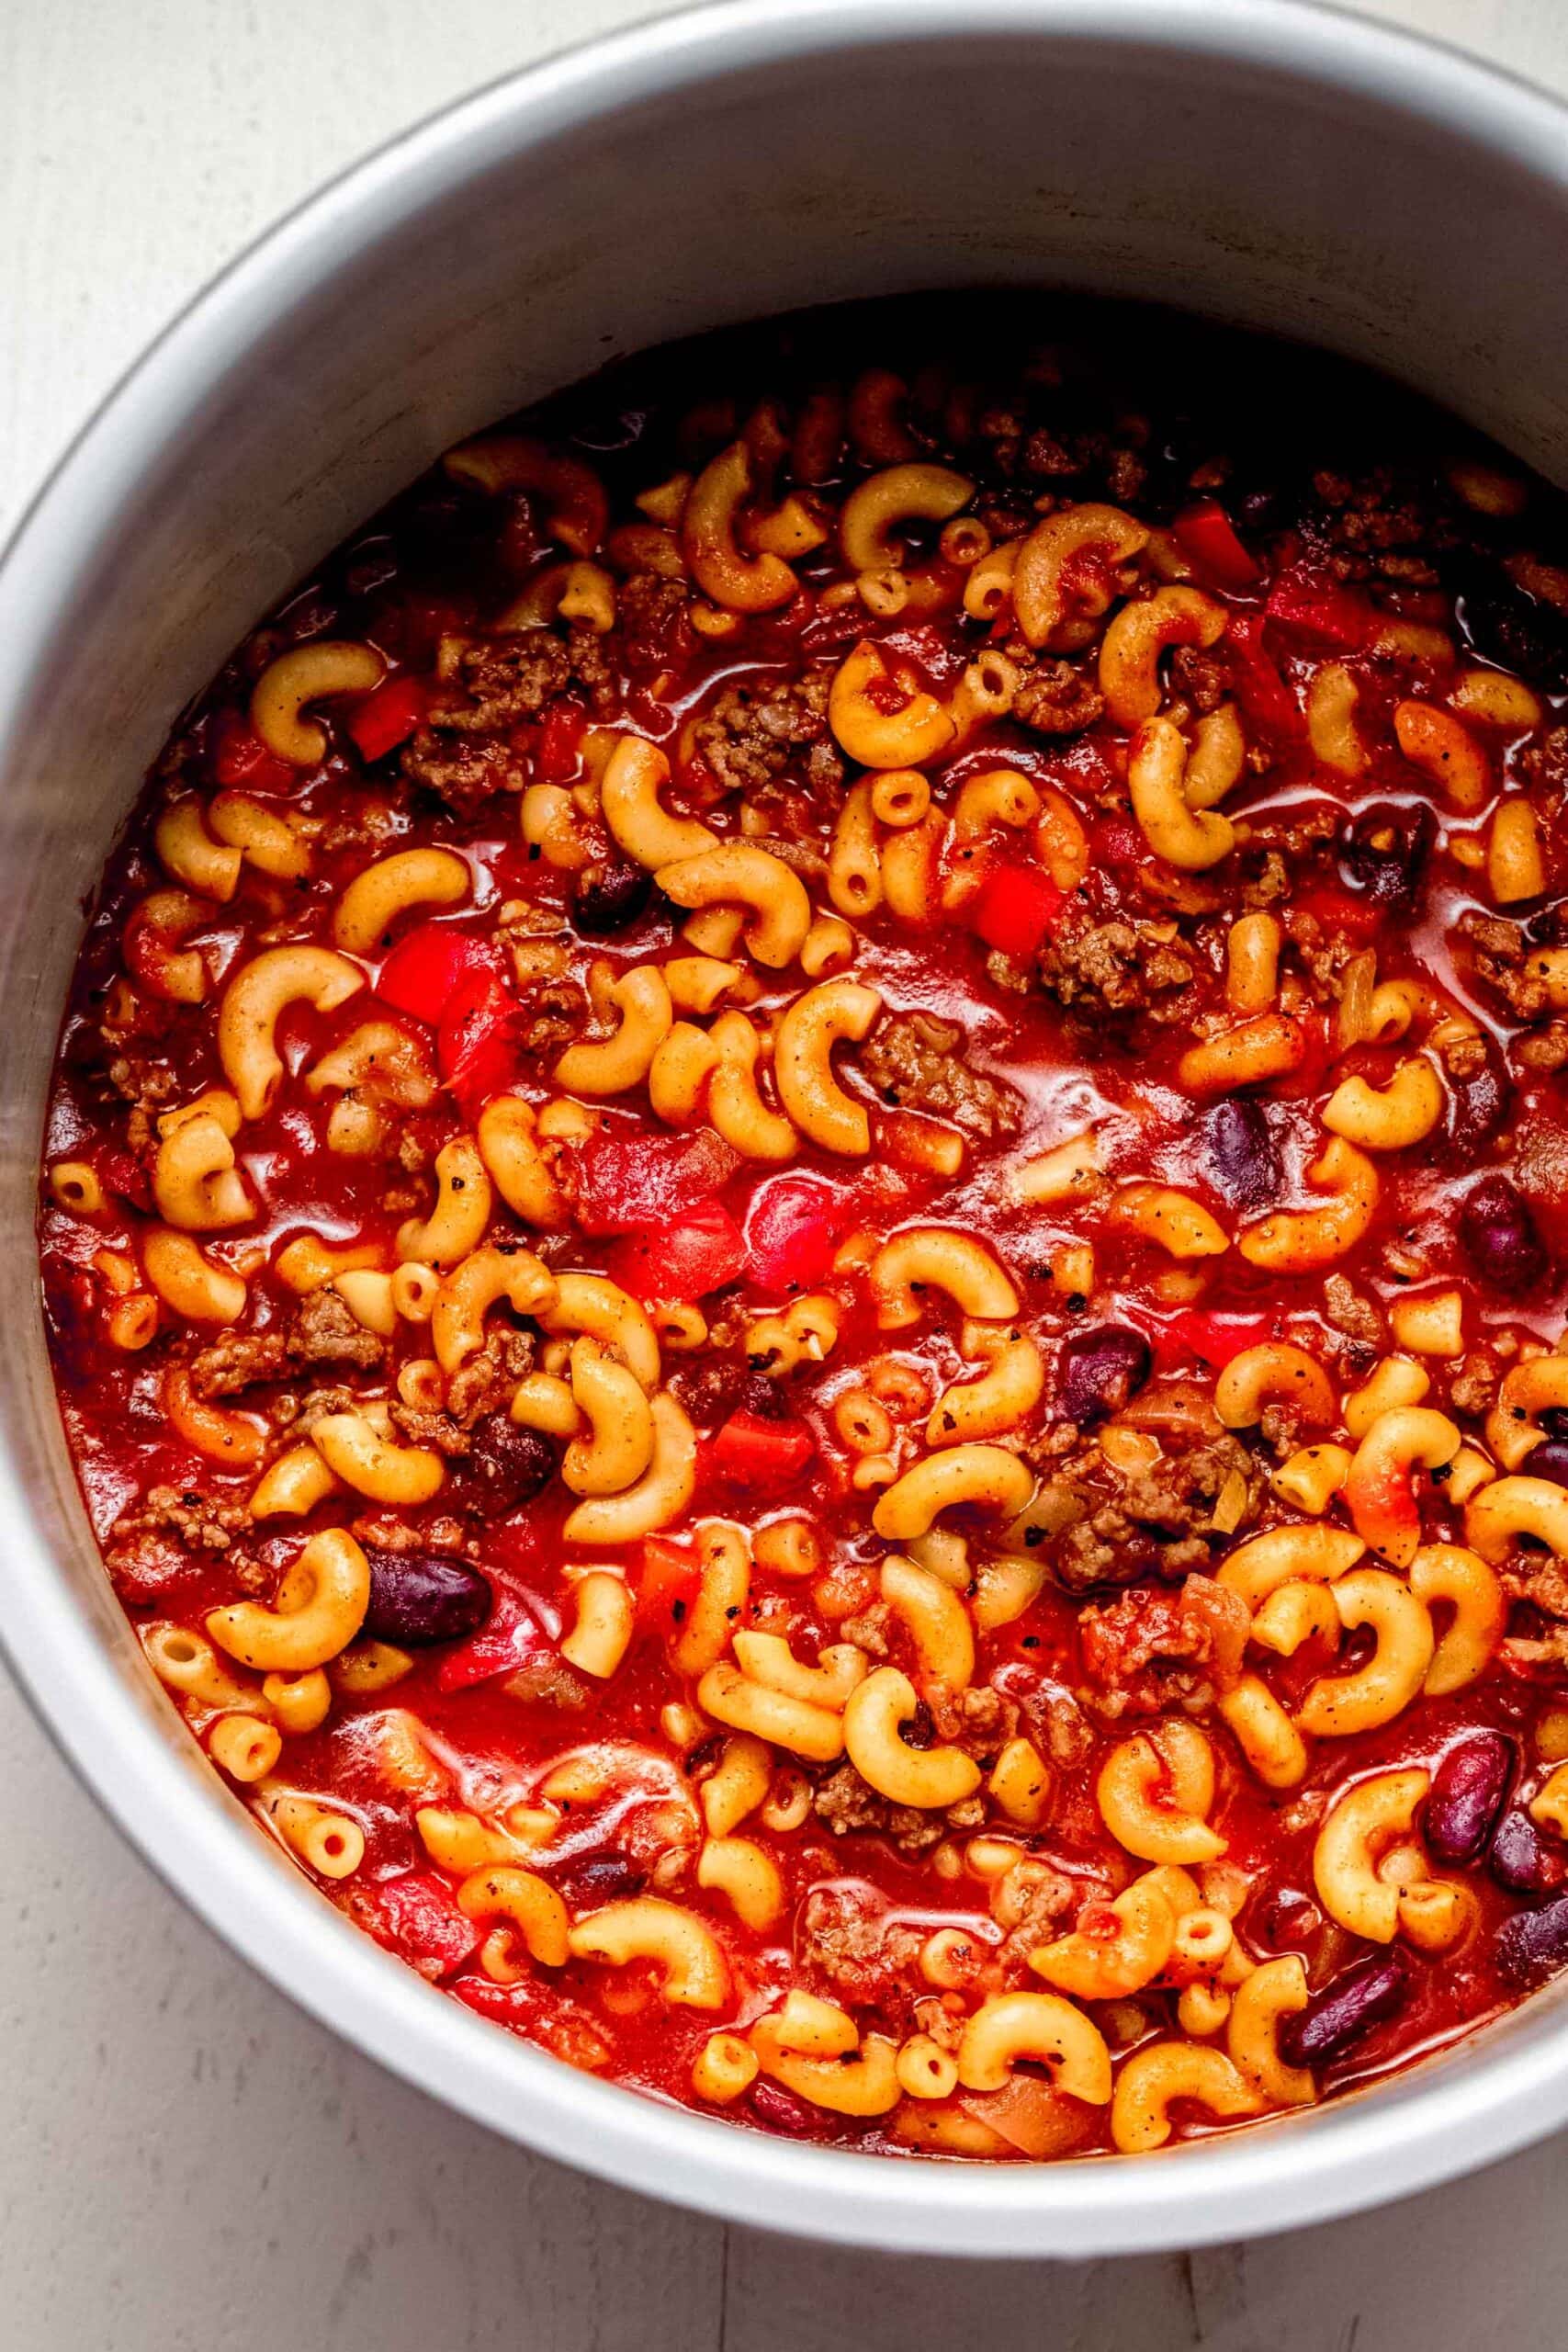 Finished chili mac in instant pot.